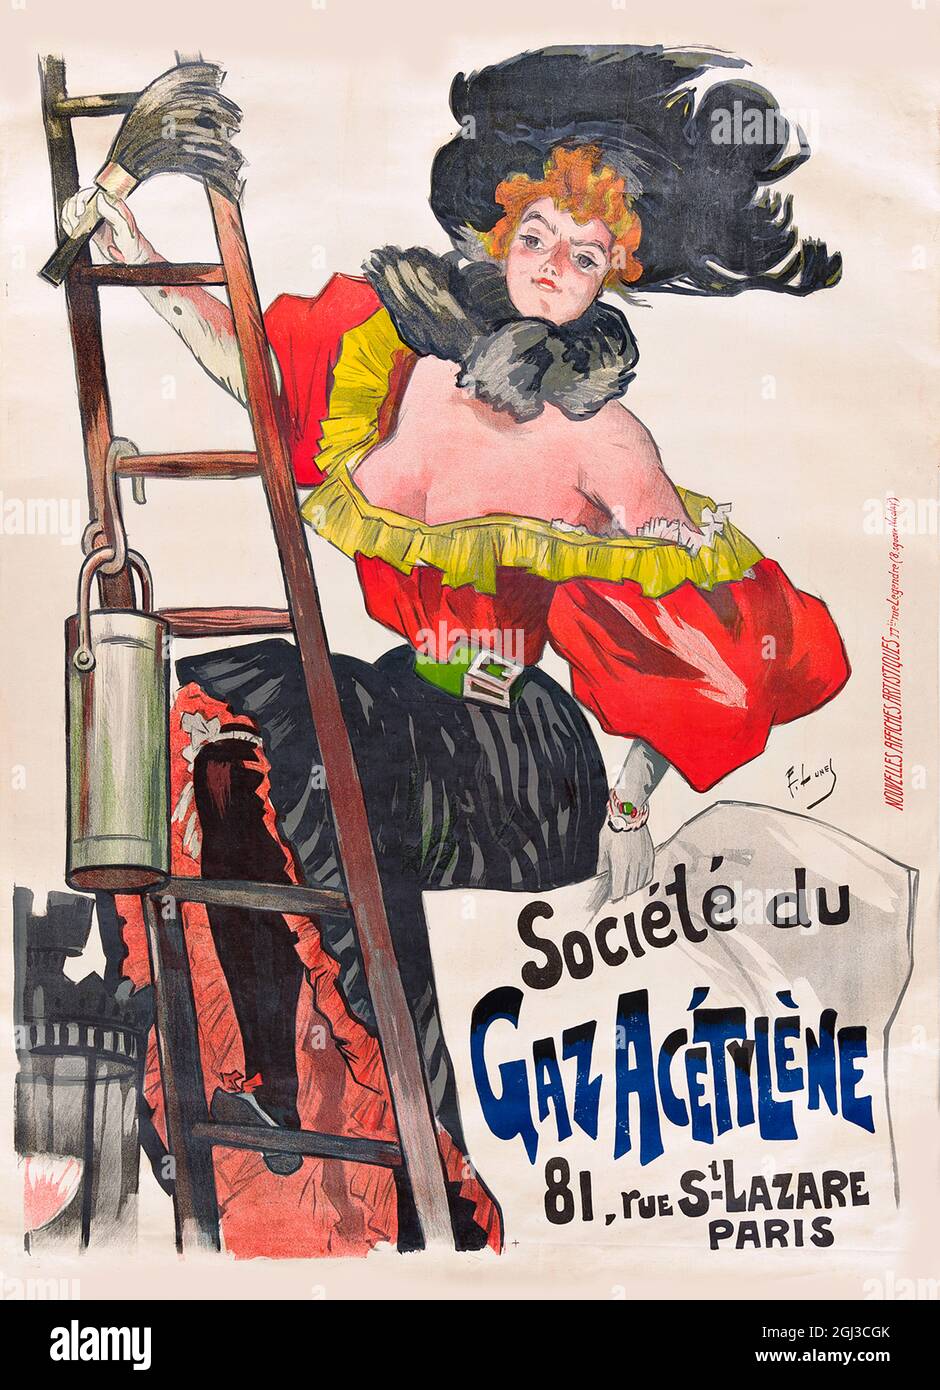 Click On Vintage French Acetylene Lamp Company poster - Poster gluer burlesque girl, 1890s Stock Photo